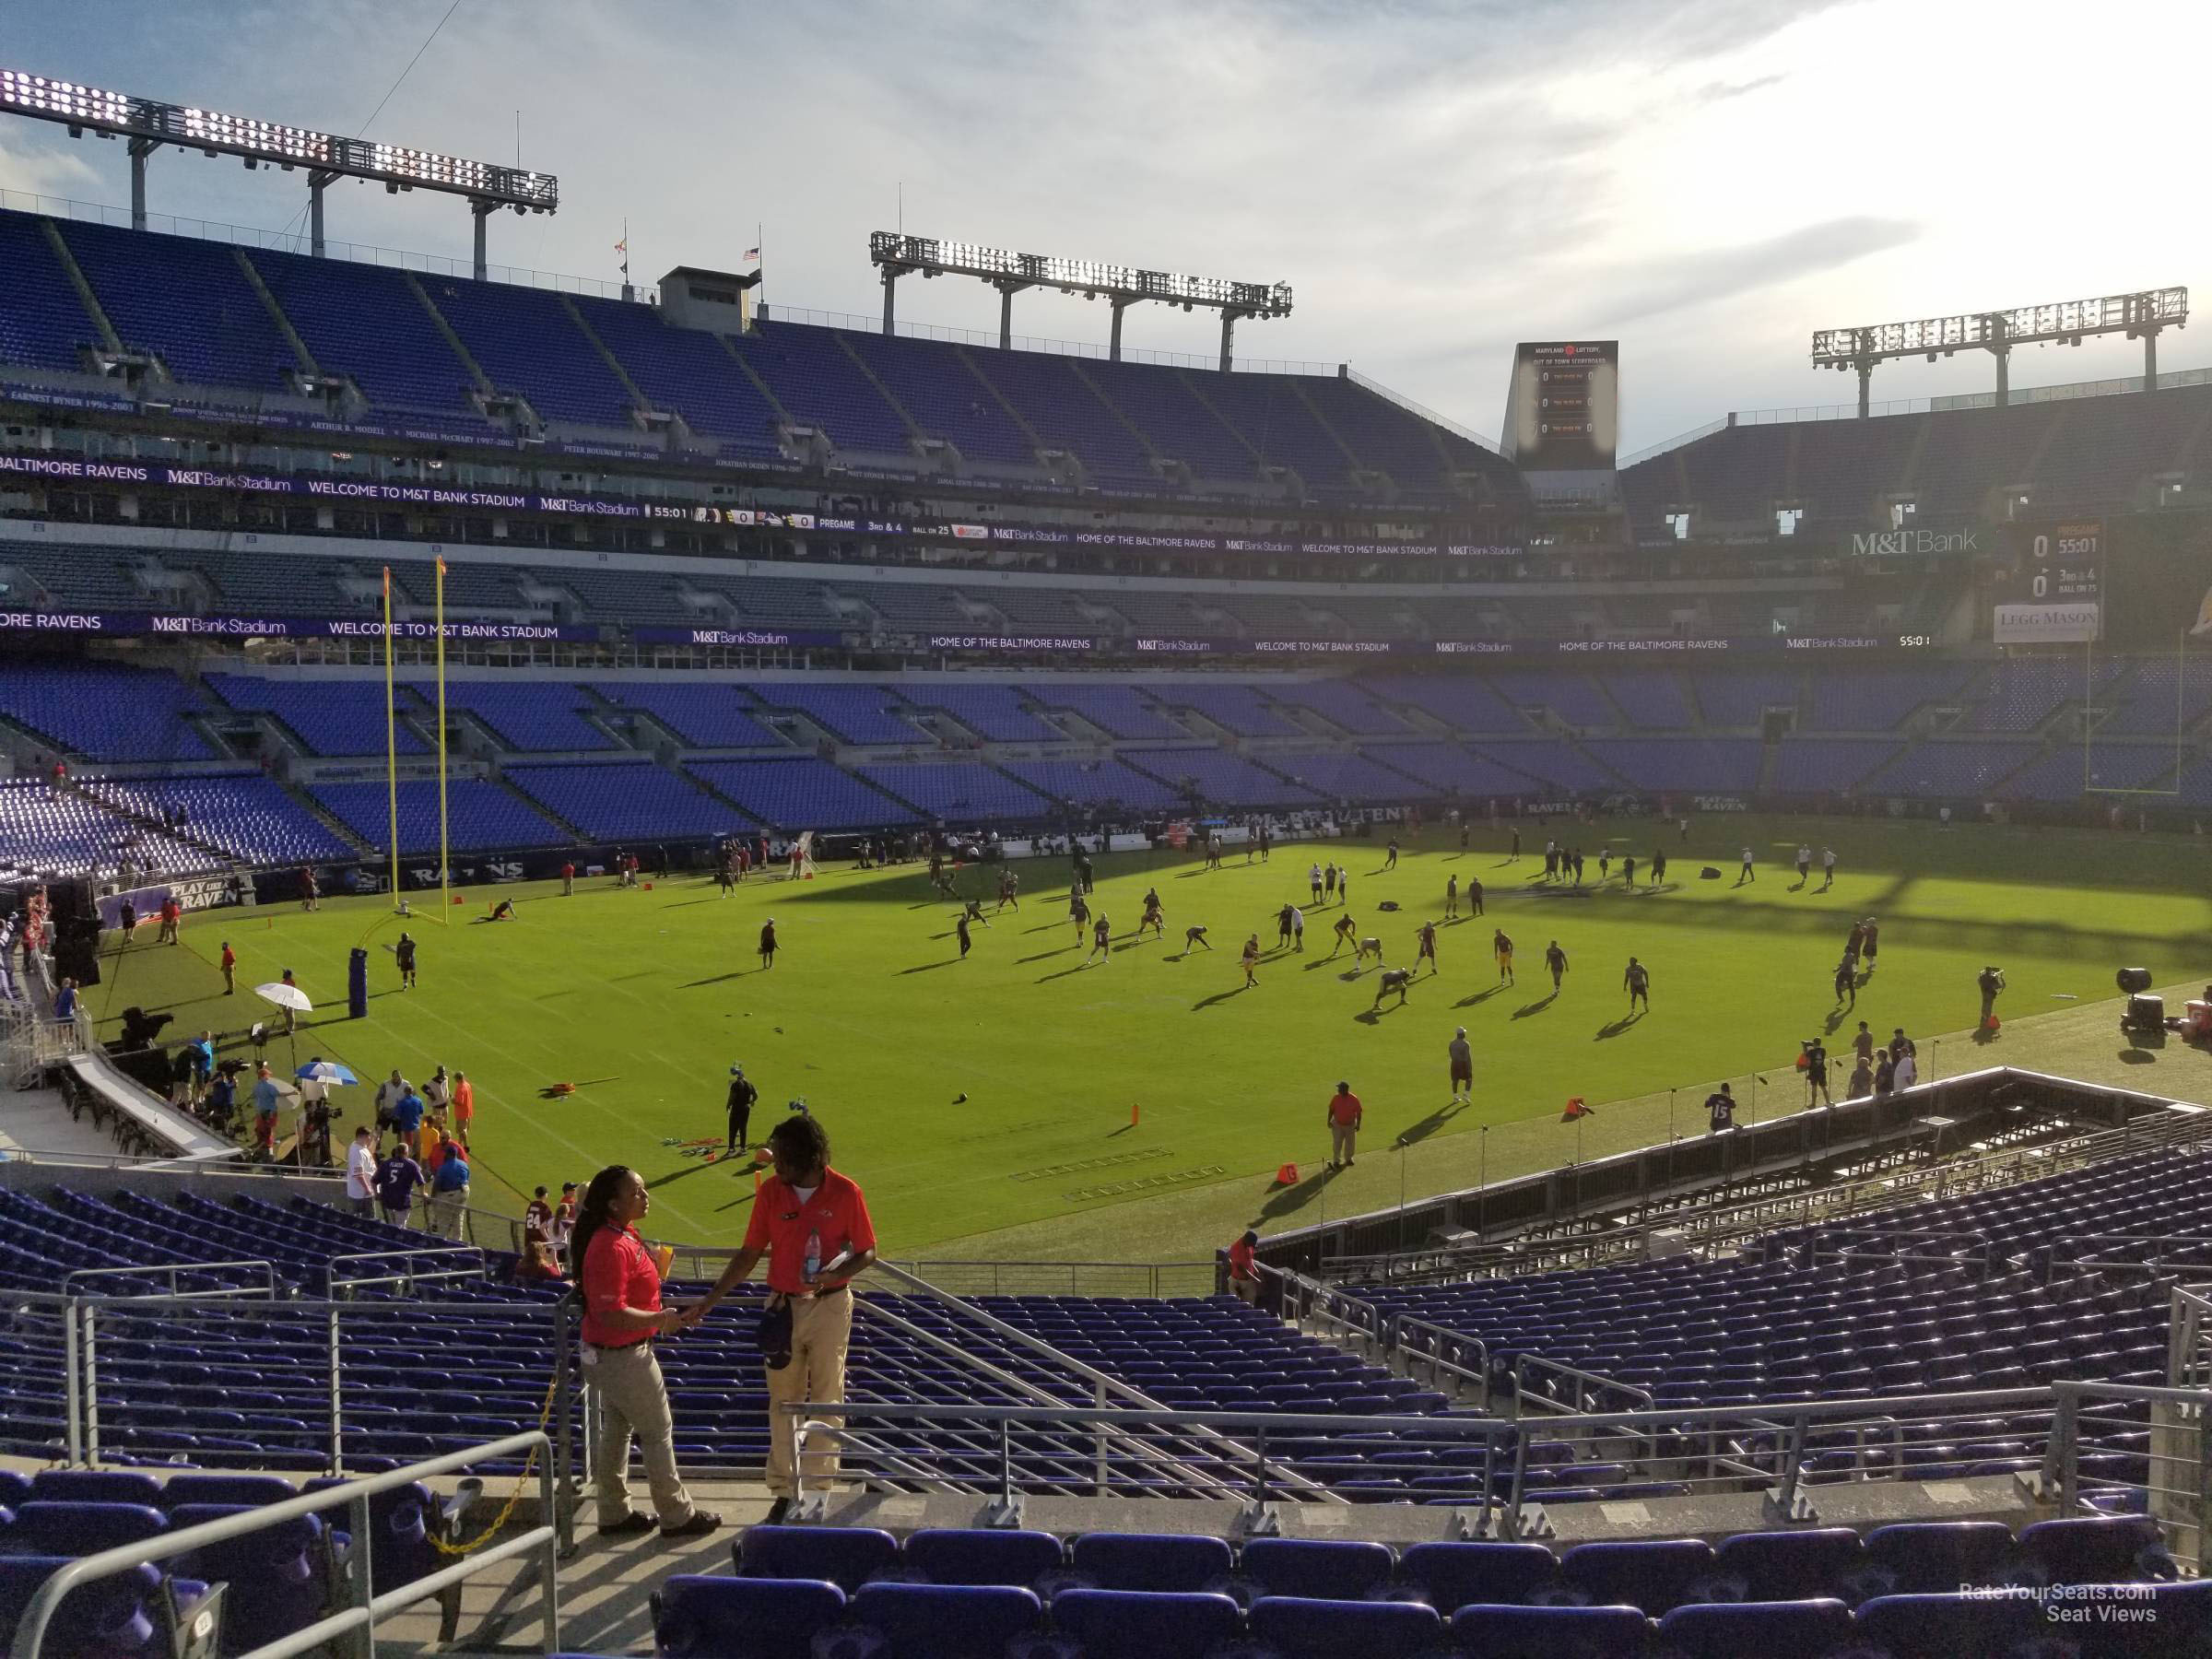 section 106, row 28 seat view  for football - m&t bank stadium